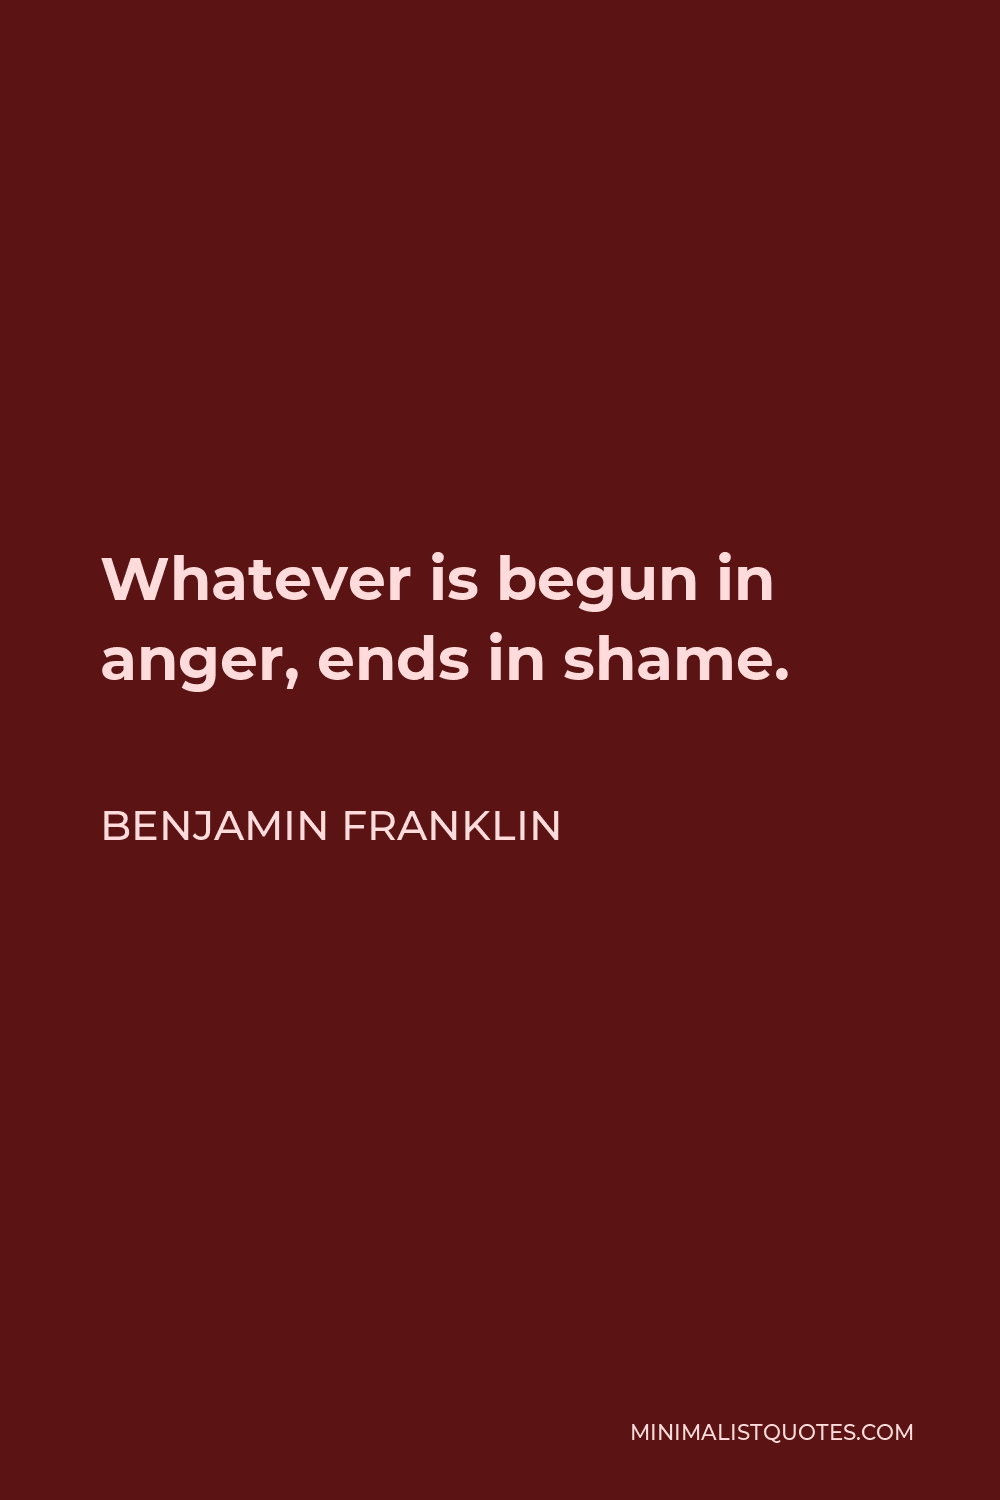 Benjamin Franklin Quote - Whatever is begun in anger, ends in shame.